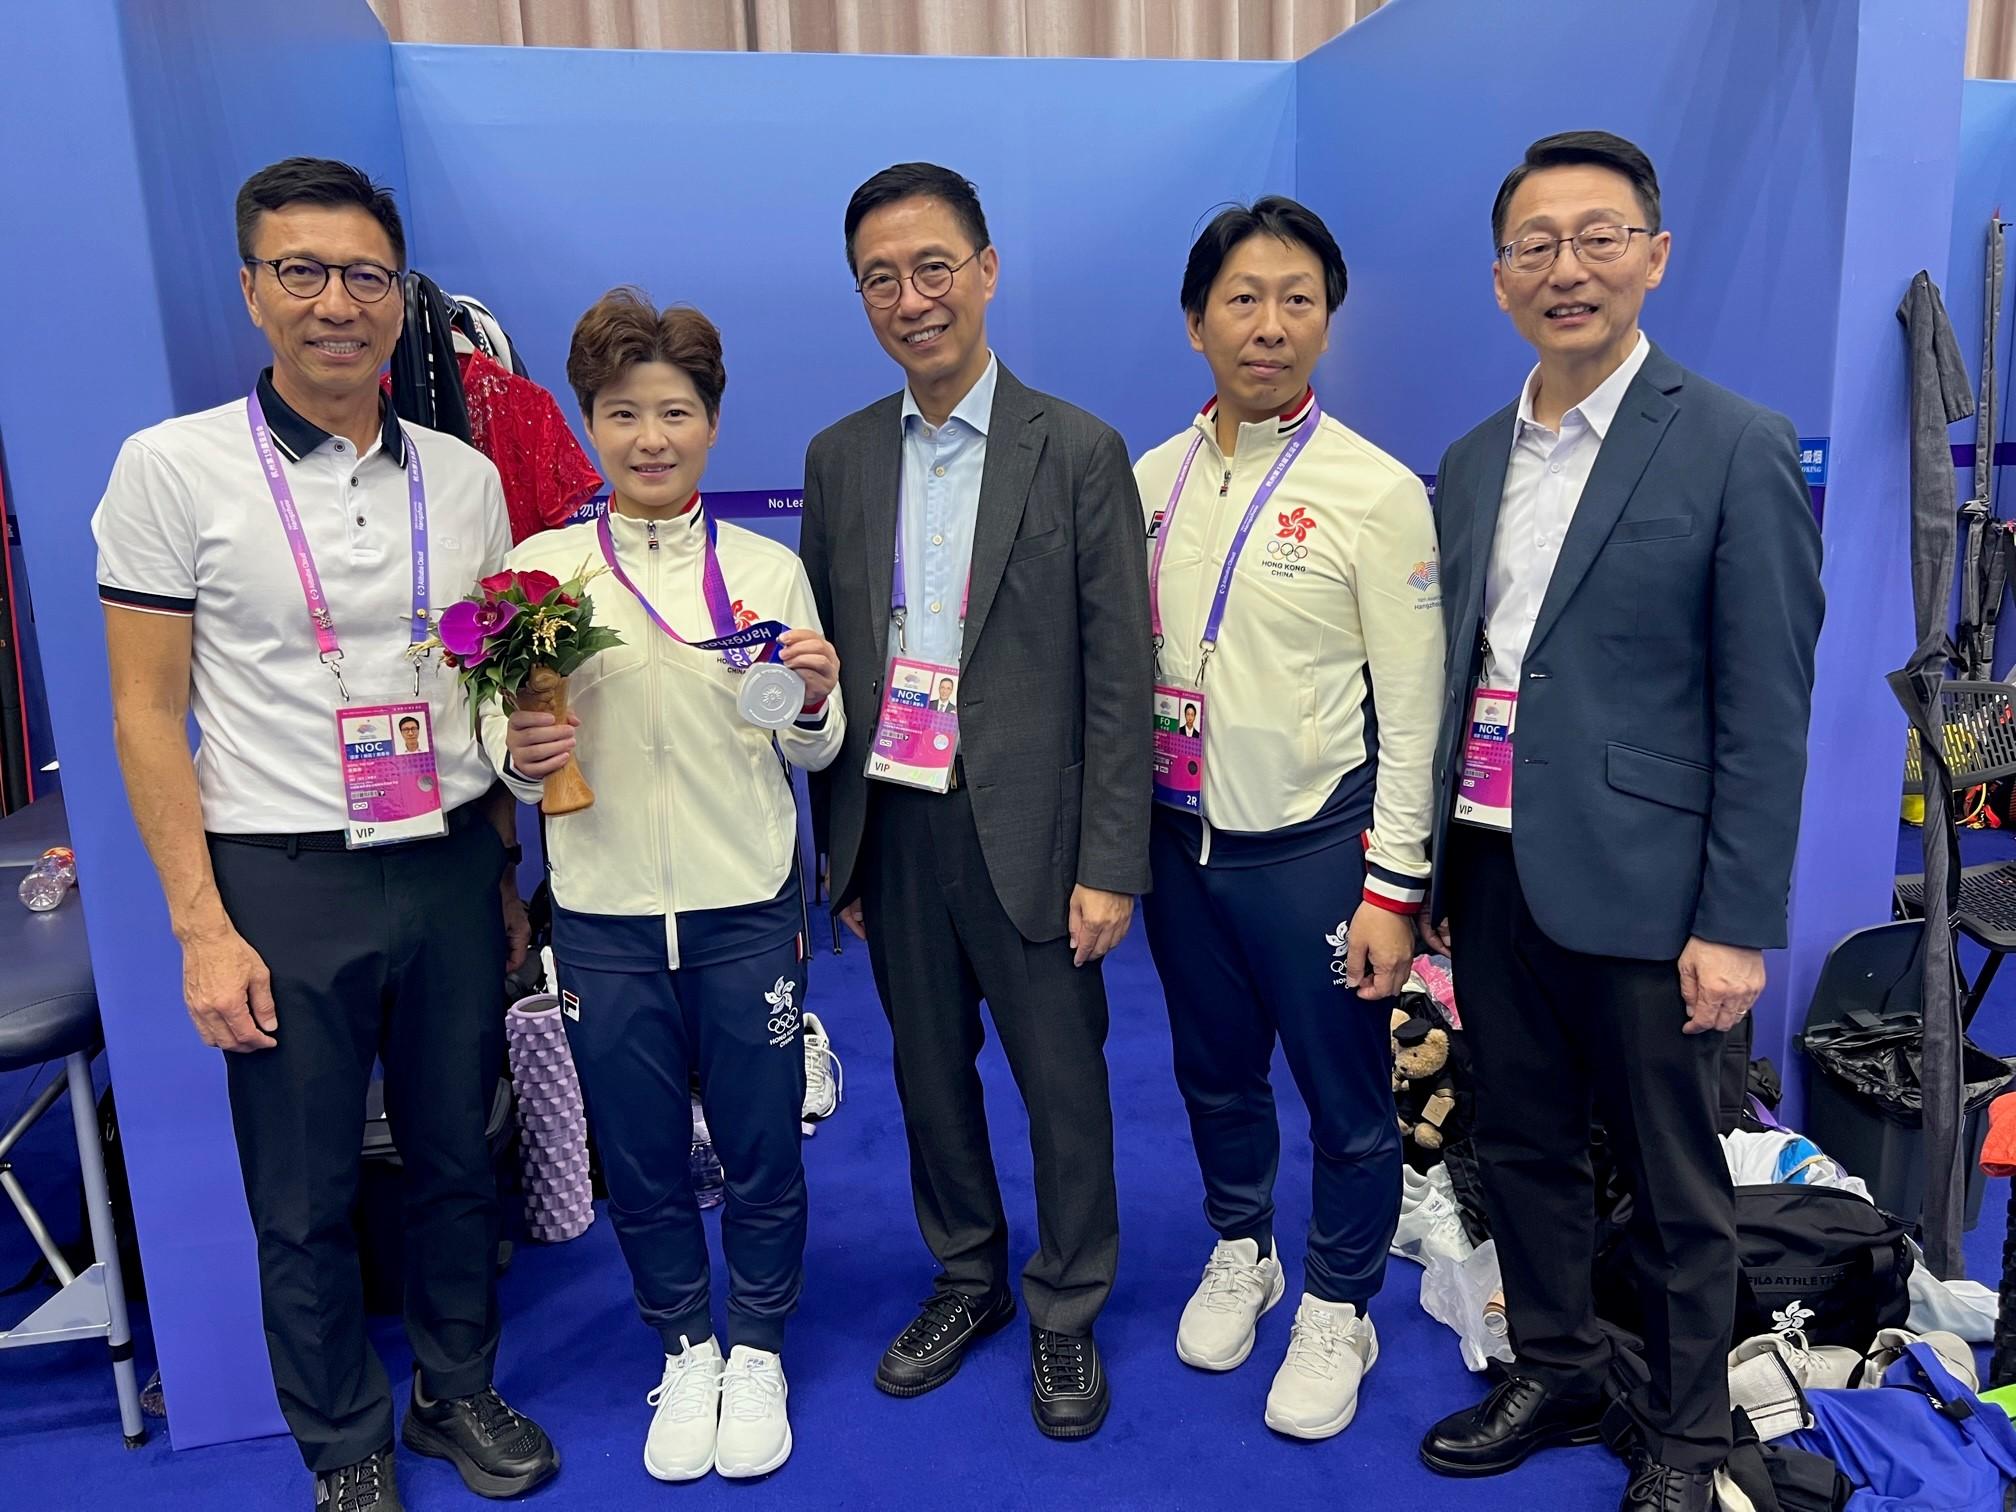 The Secretary for Culture, Sports and Tourism, Mr Kevin Yeung (centre), today (September 25) congratulated Liu Xuxu (second left), on winning a silver medal in Wushu Women's Changquan at the 19th Asian Games Hangzhou.